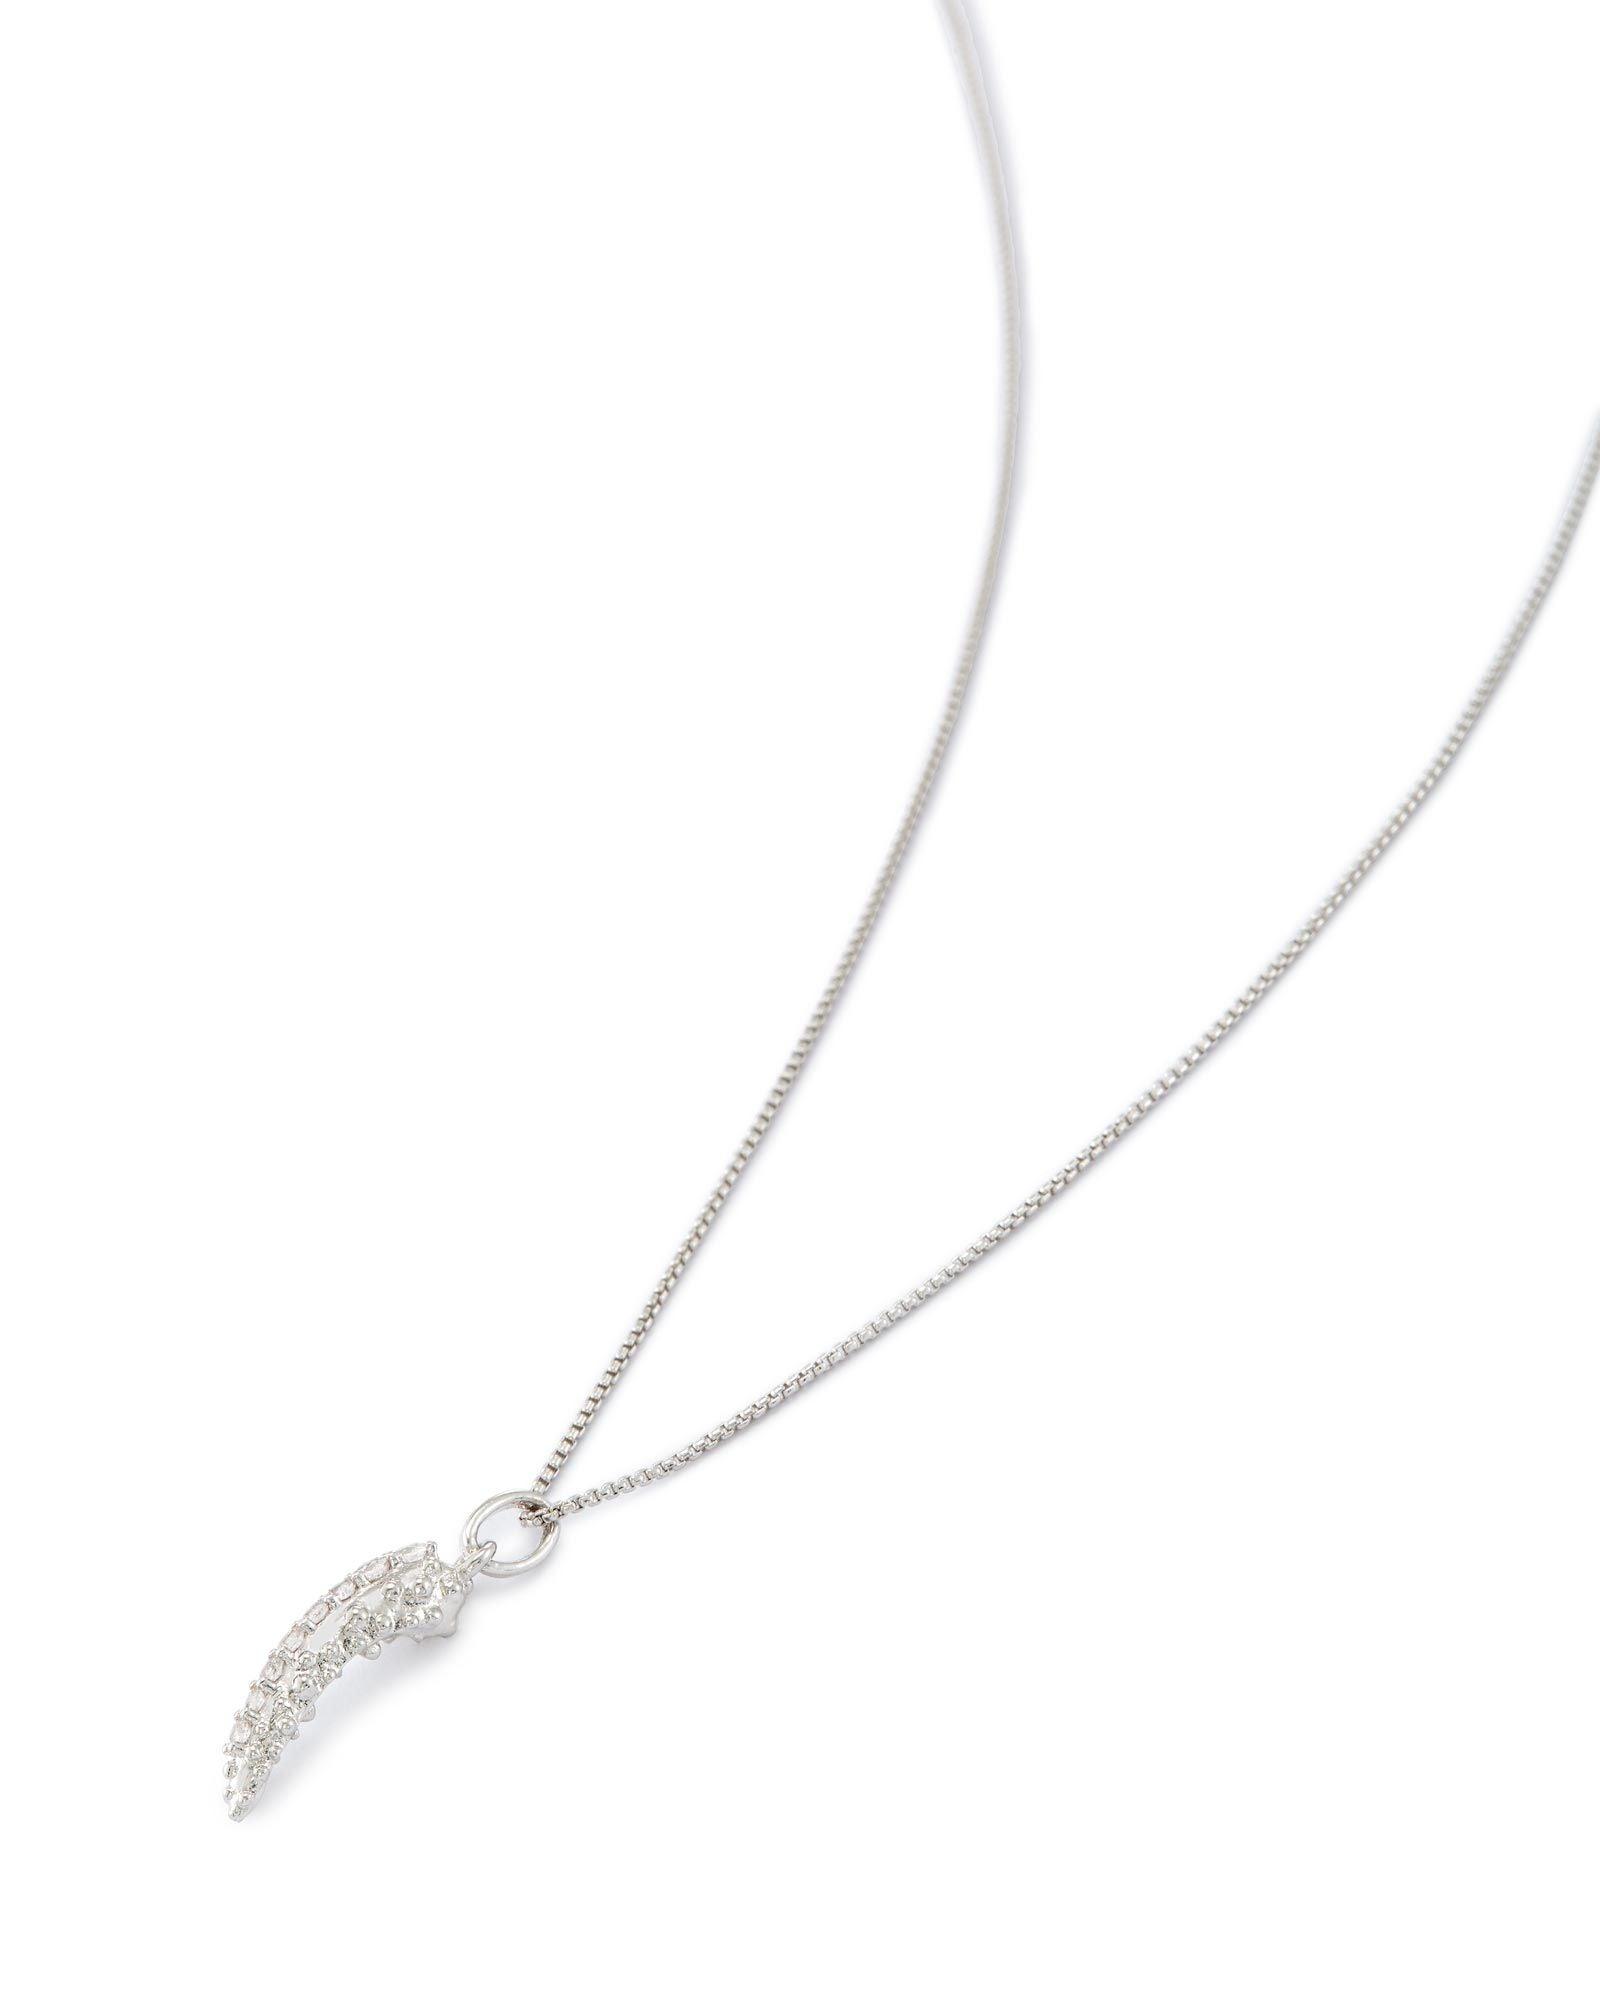 Stormie Necklace - The Silver Dahlia